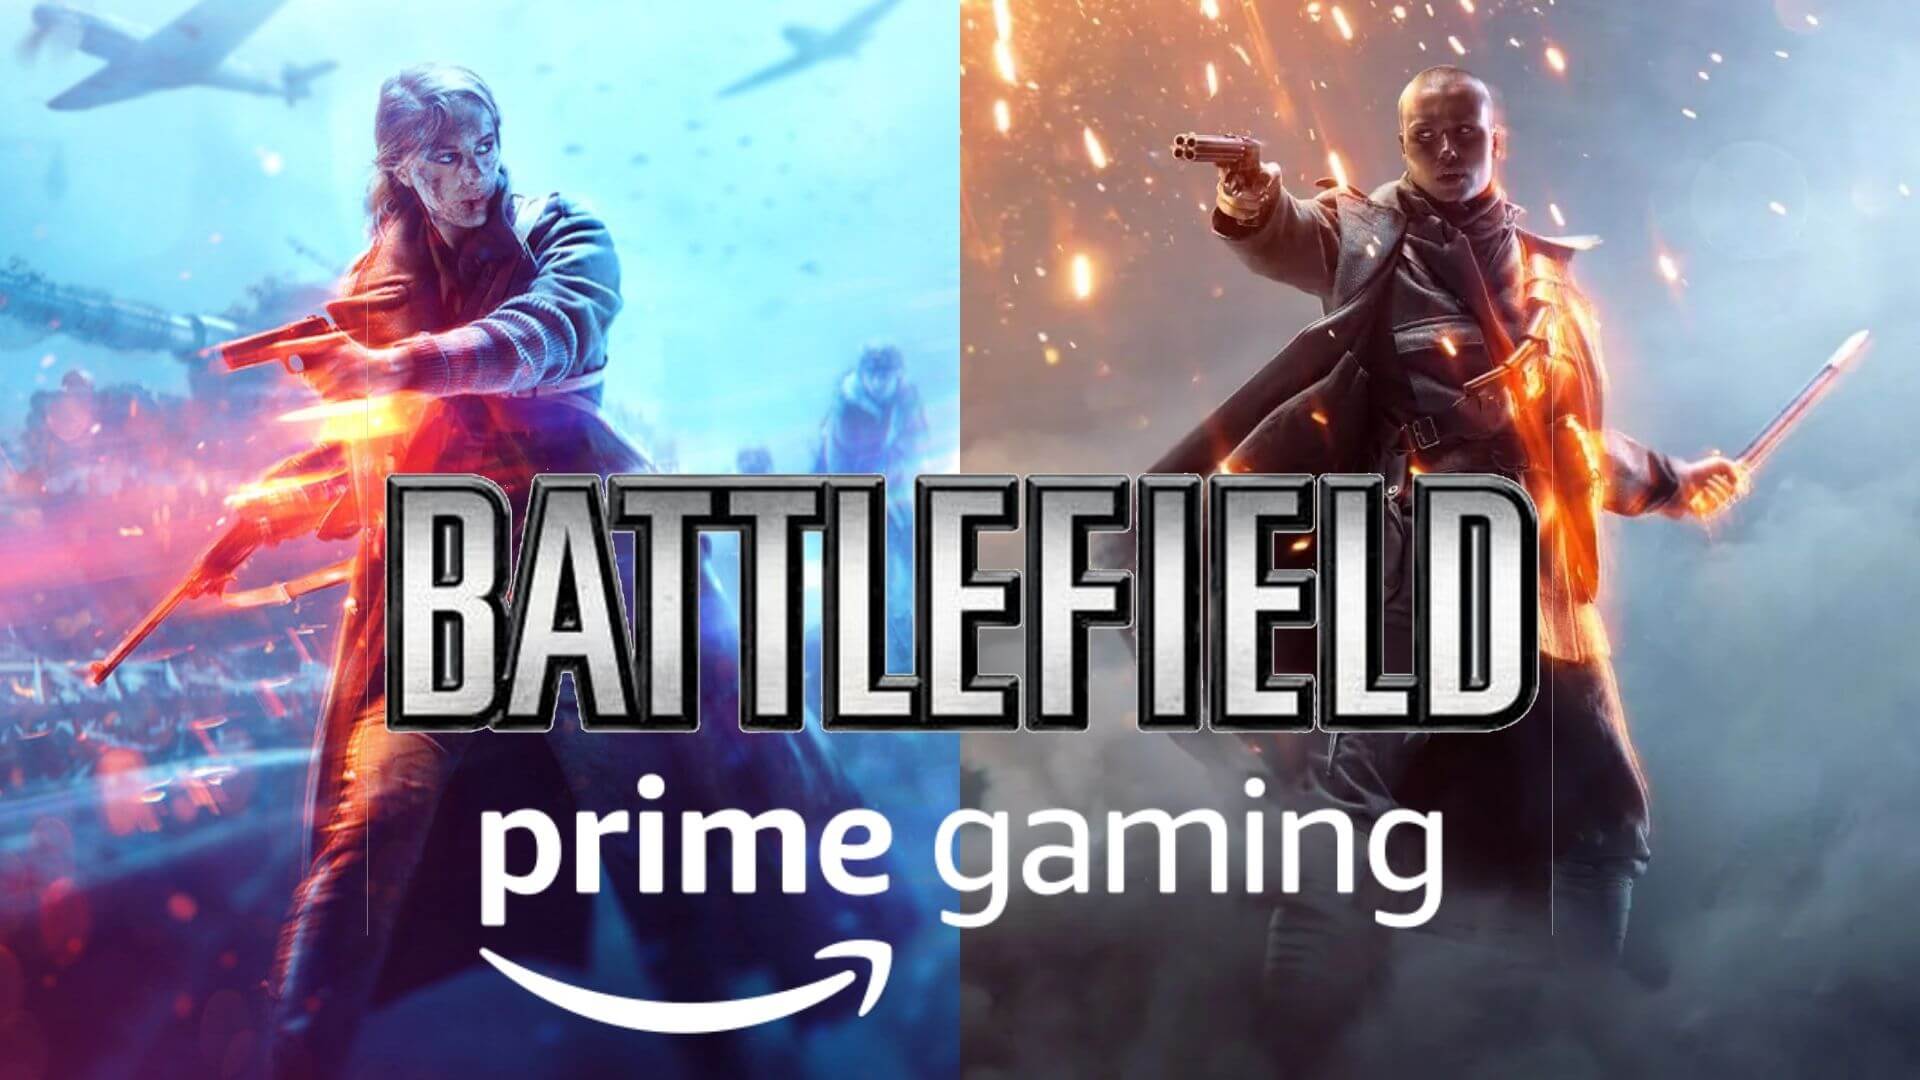 Battlefield 1 and Battlefield V are free to keep through